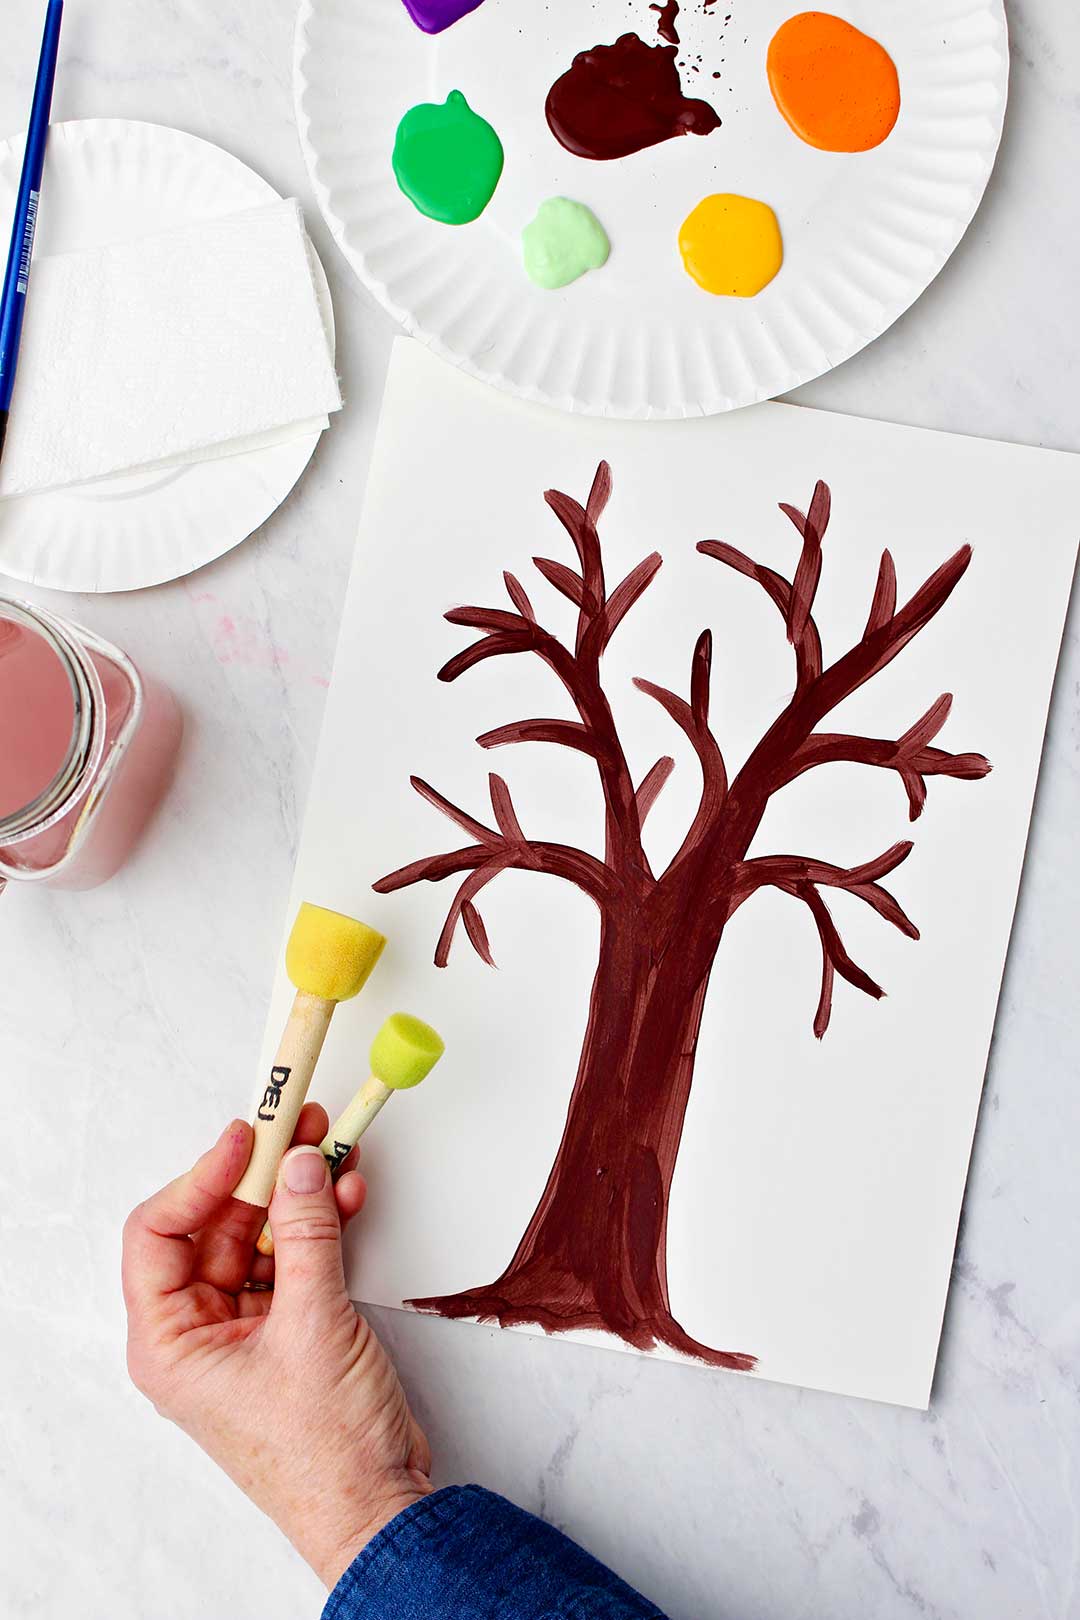 Hand showing two different circular stamping tools next to their tree trunk painting with a plate of paints and some water near by.